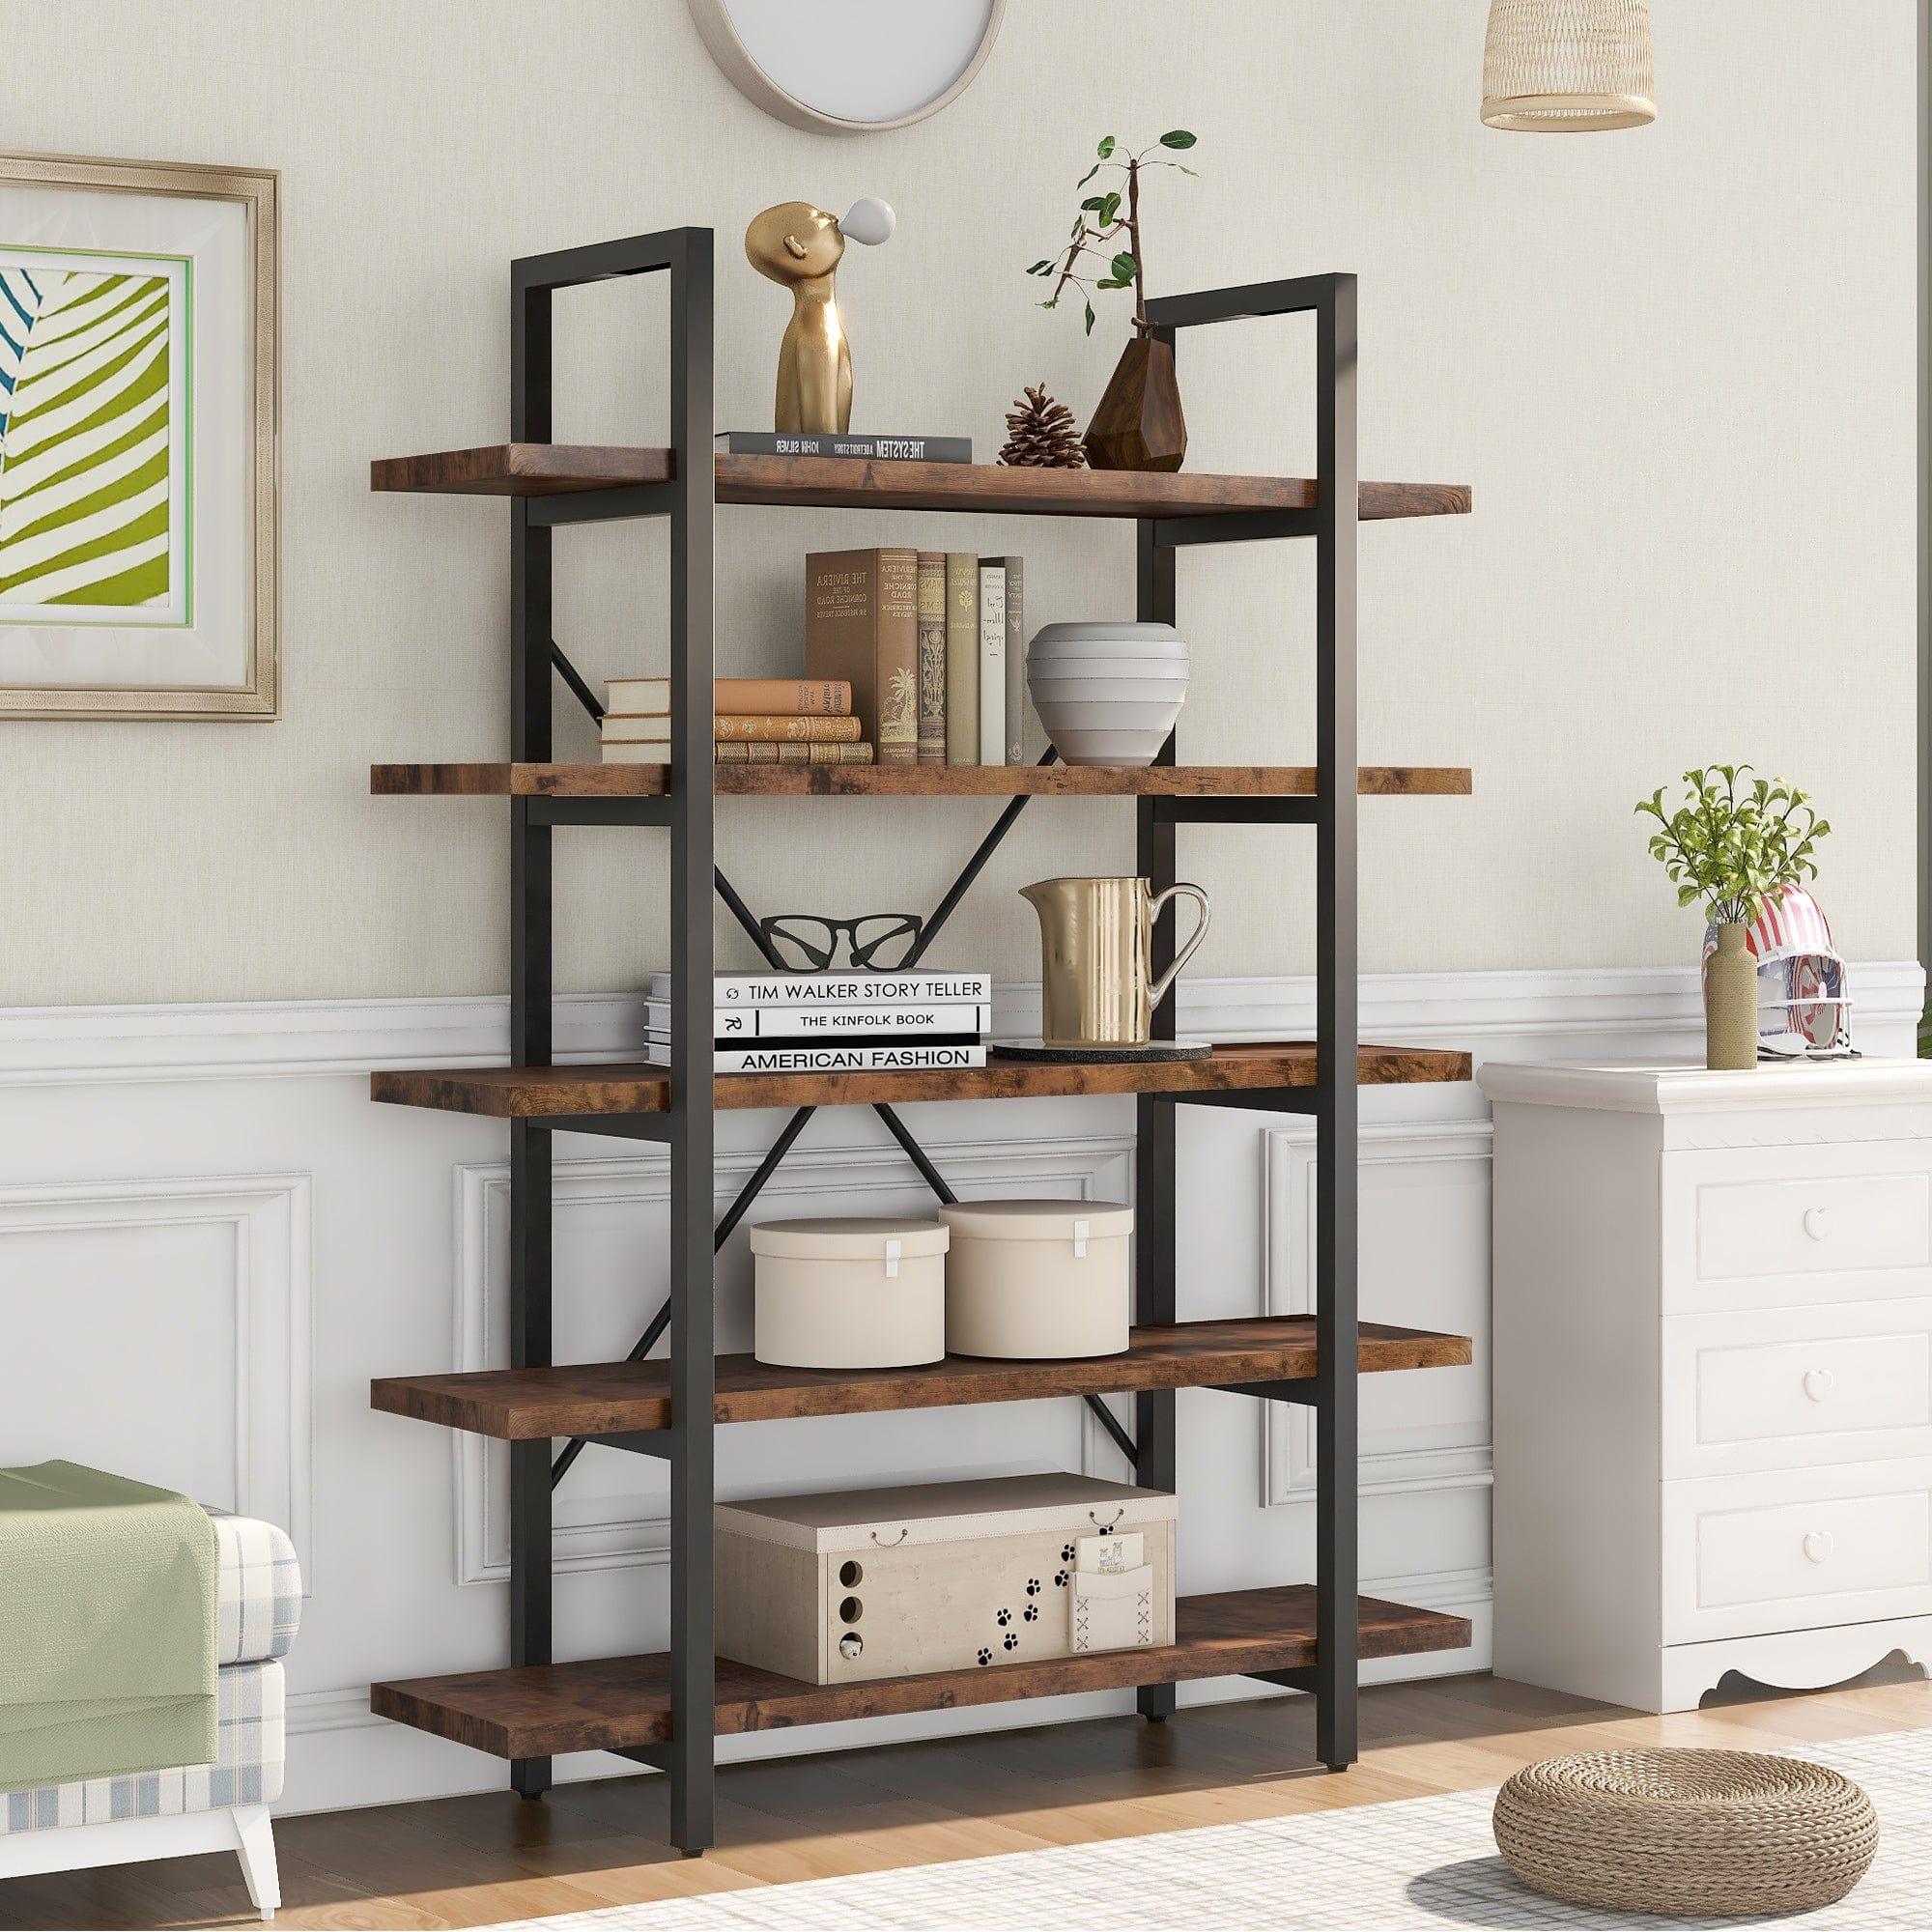 Shop ON-TREND  5-tier Industrial Bookcase with Rustic Wood and Metal Frame, Large Open Bookshelf for Living Room（Distressed Brown） Mademoiselle Home Decor